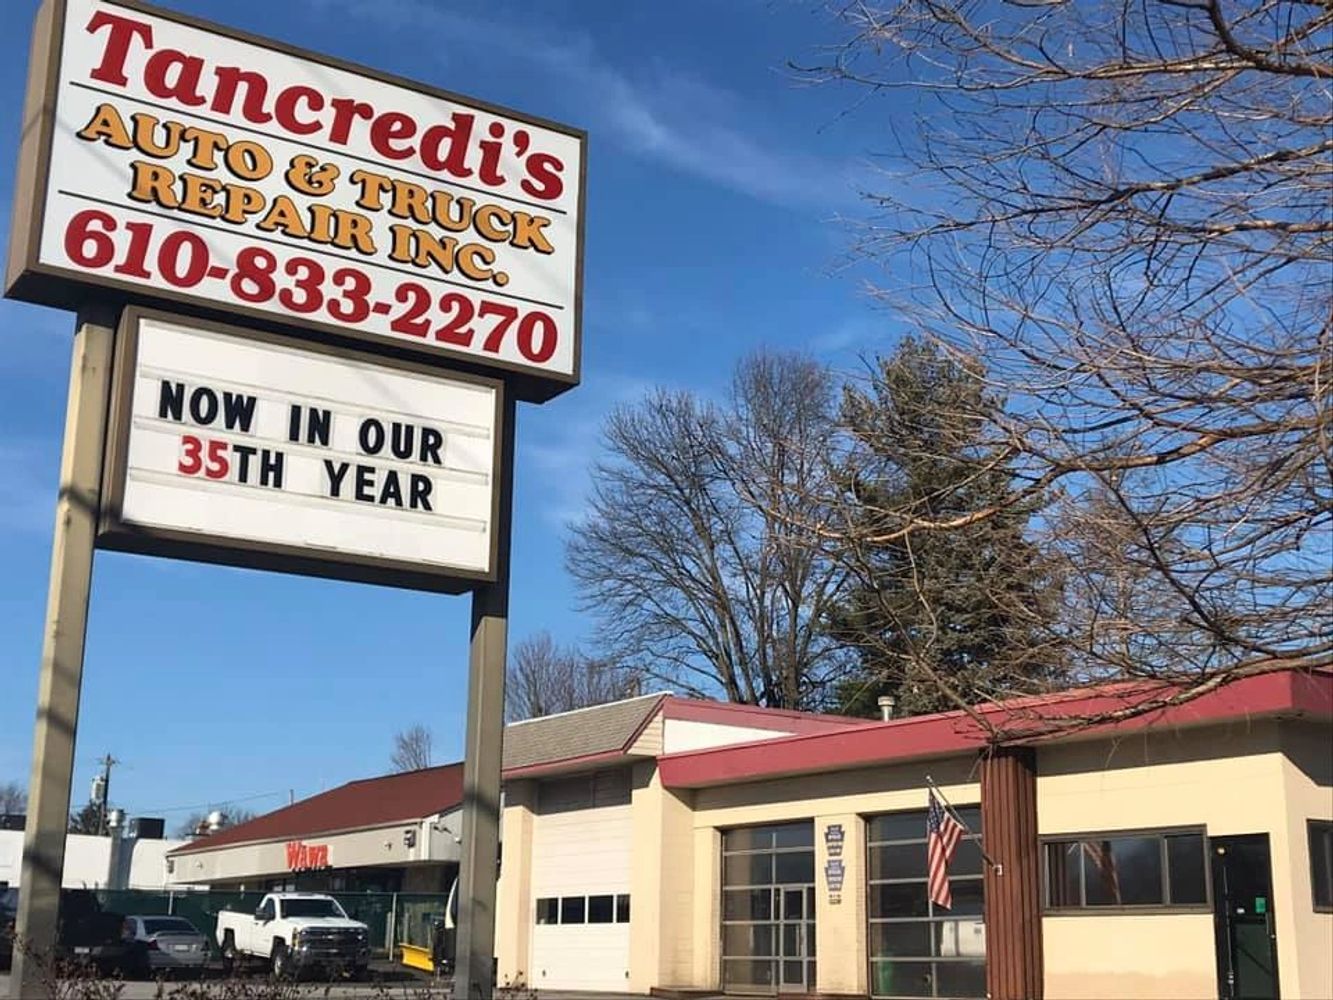 Tancredi's Auto is a full service Auto Repair shop offering Auto Repairs at their Woodlyn, PA locati